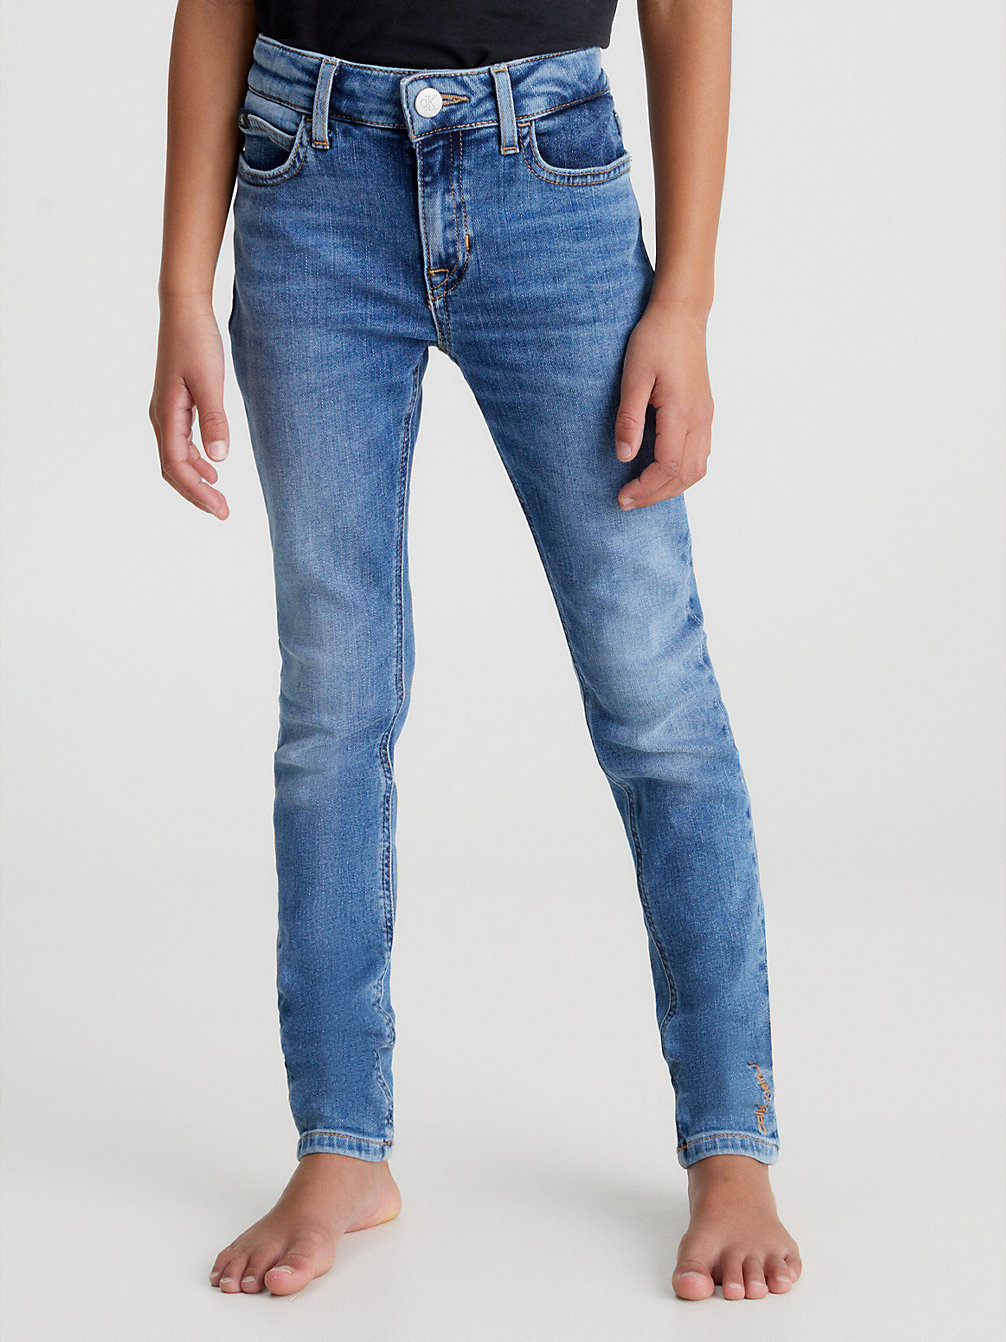 STORMY BLUE Mid Rise Skinny Jeans undefined girls Calvin Klein